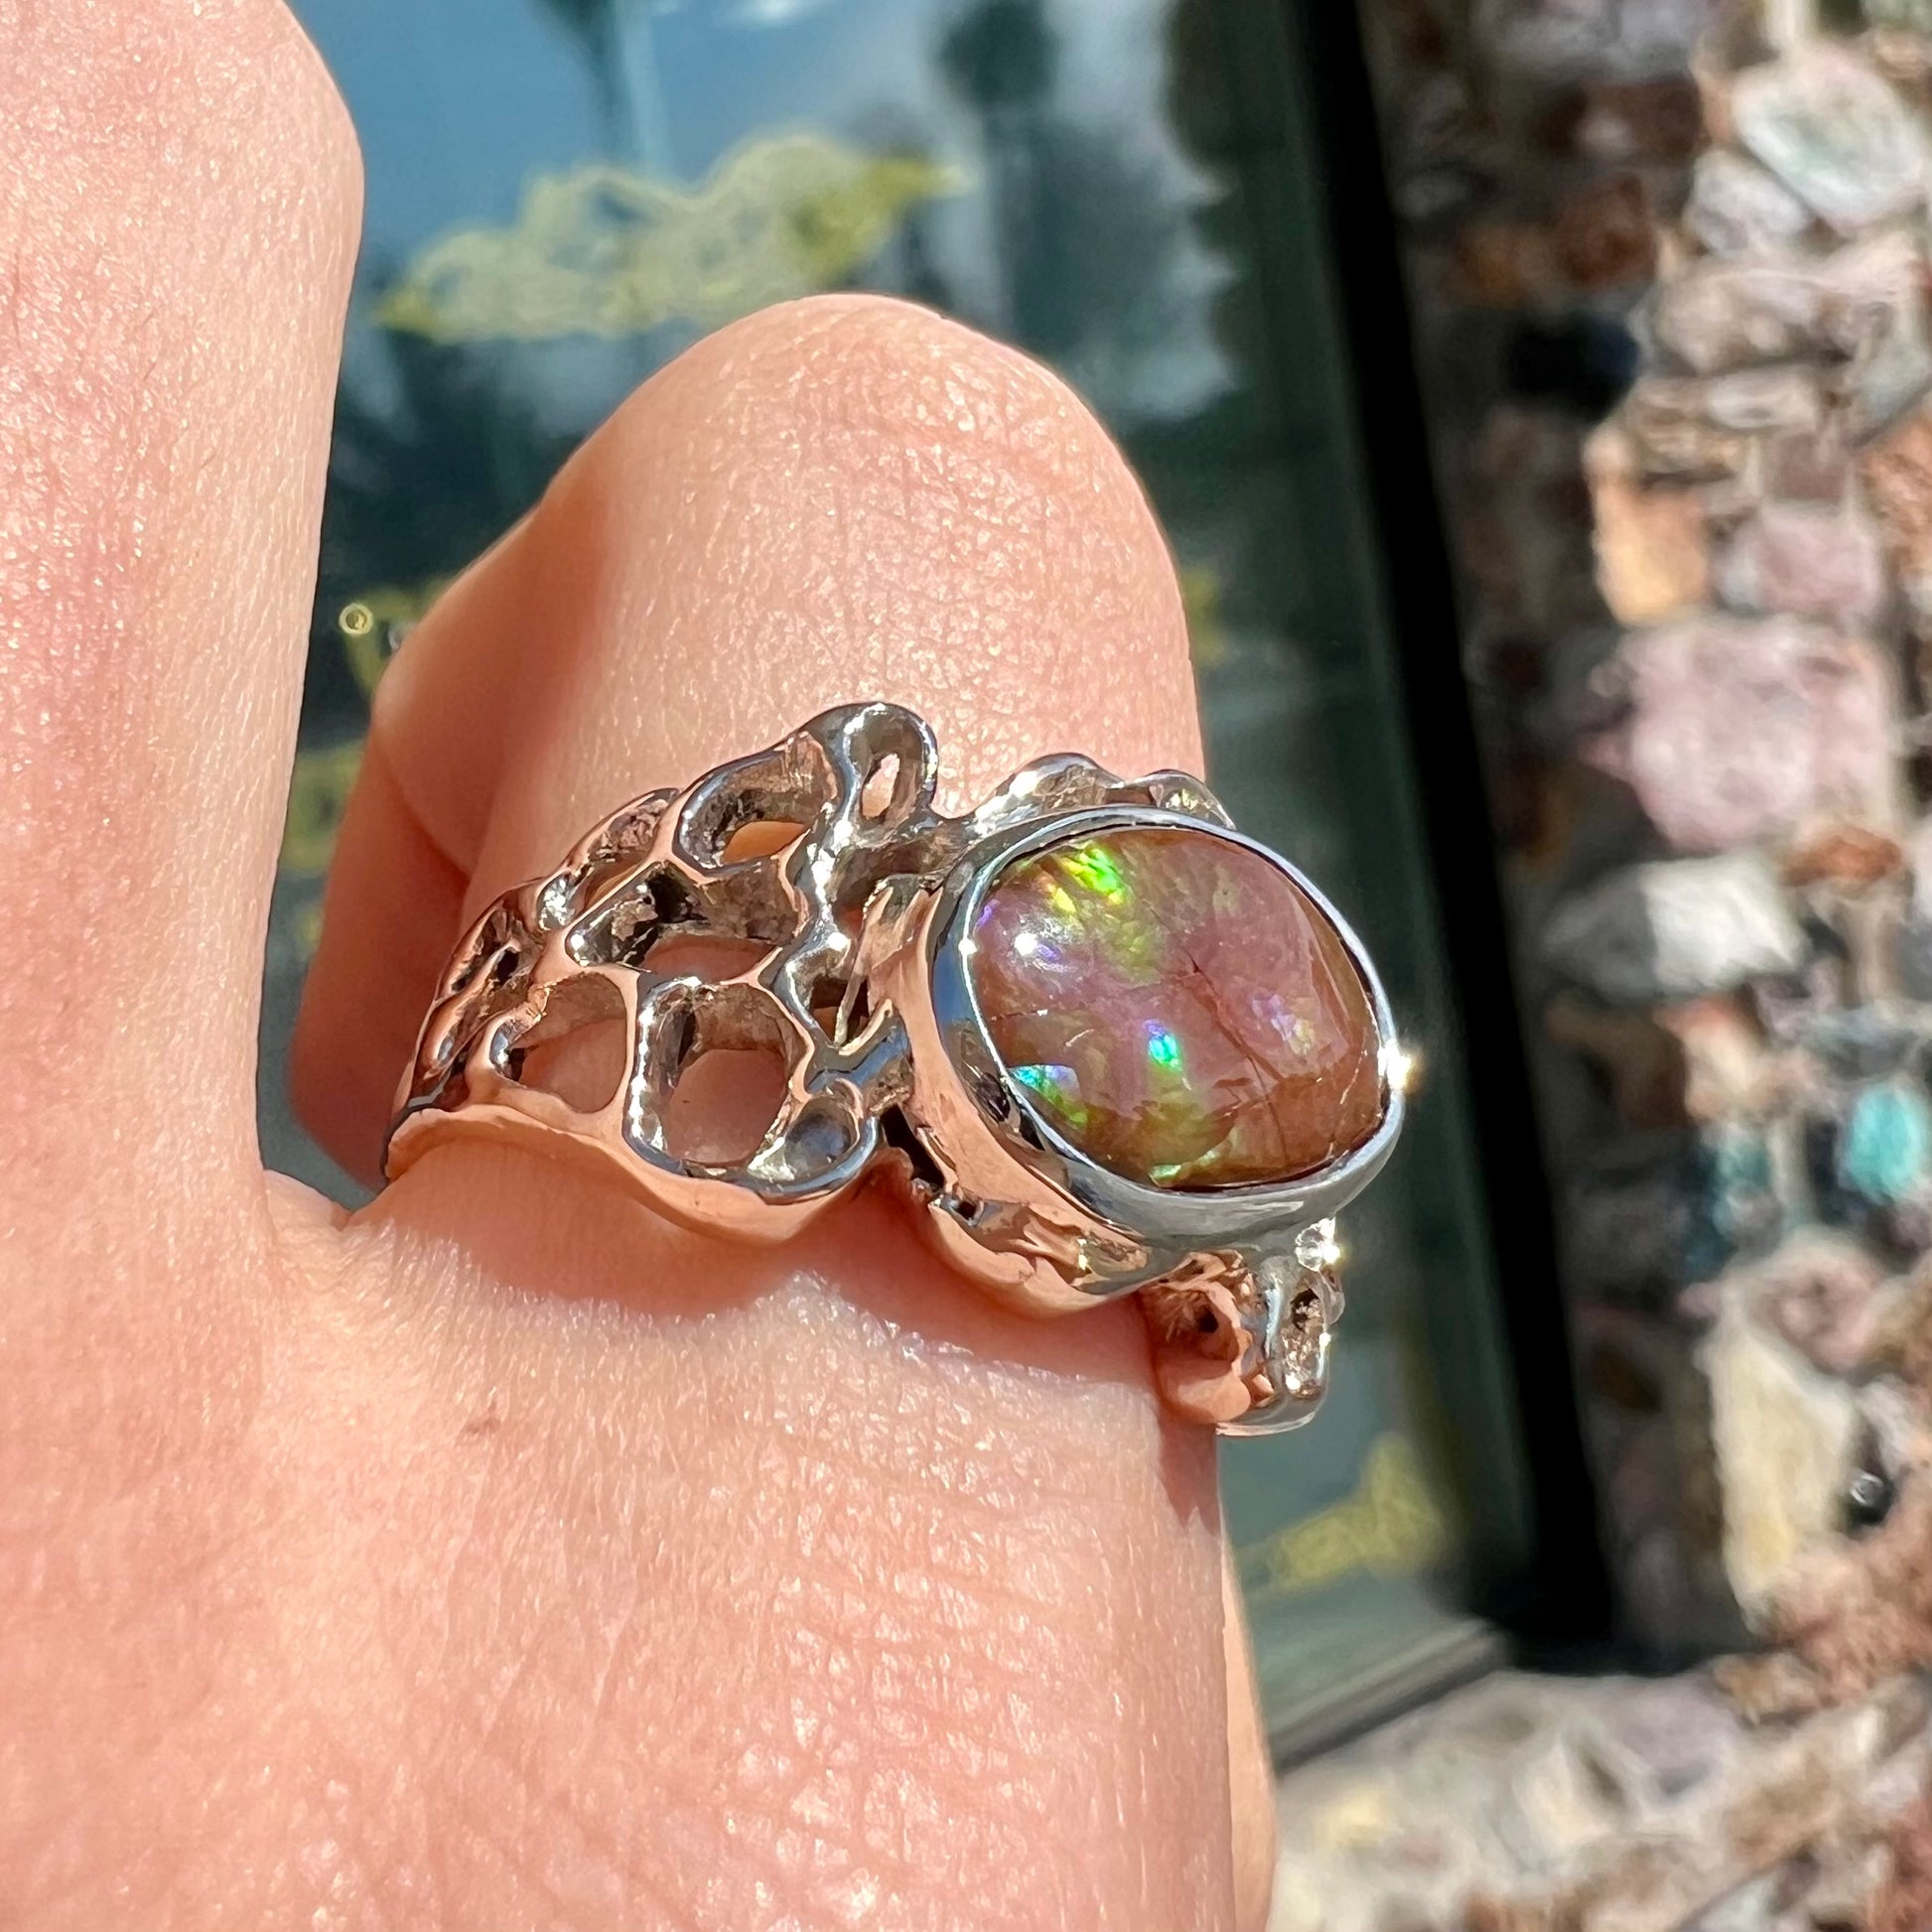 An organic-style white gold men's ring, bezel set with an oval cut Mexican fire agate stone.  The stone is green and purple.